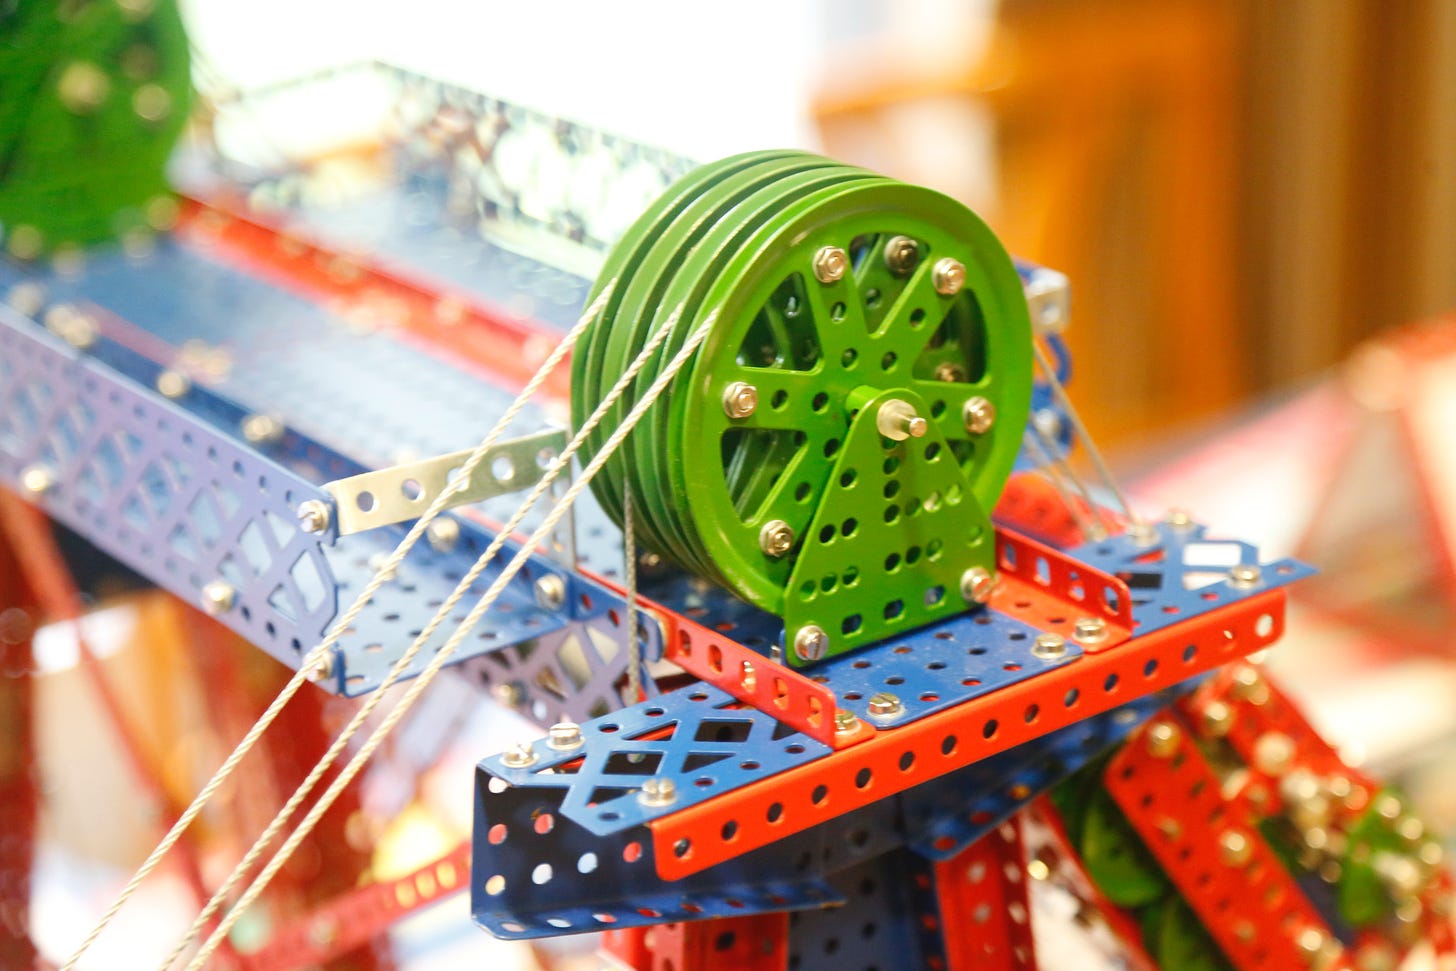 Close-up of a portion of a colorful erector set, featuring a set of green pulleys side by side with cables running through them